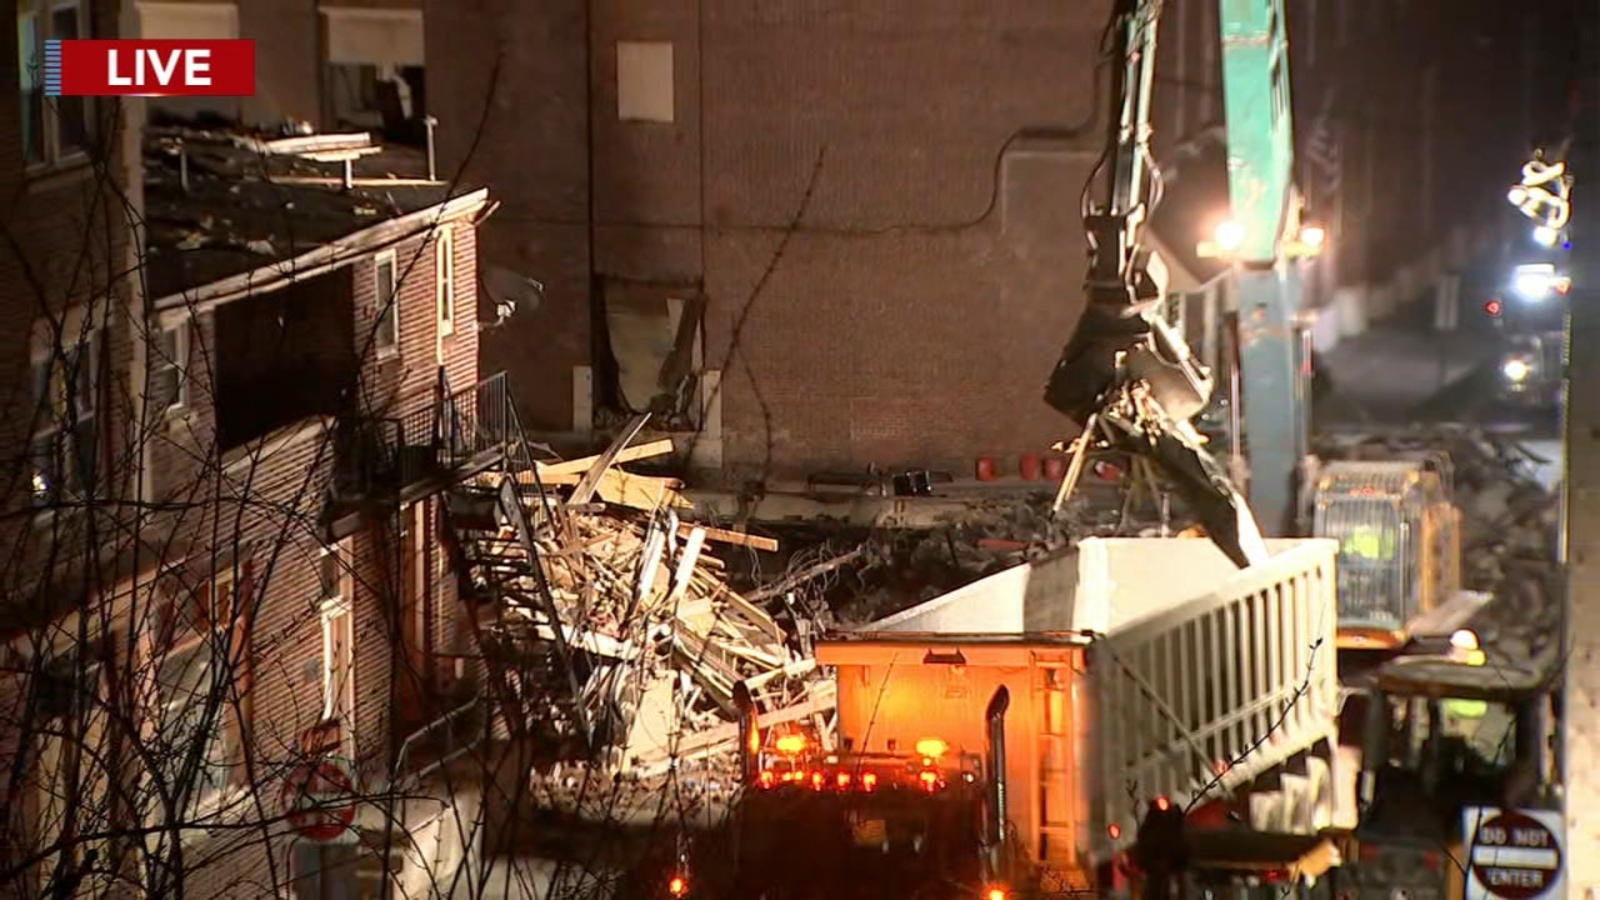 2 more victims found dead following Pennsylvania chocolate factory explosion; 7 people killed